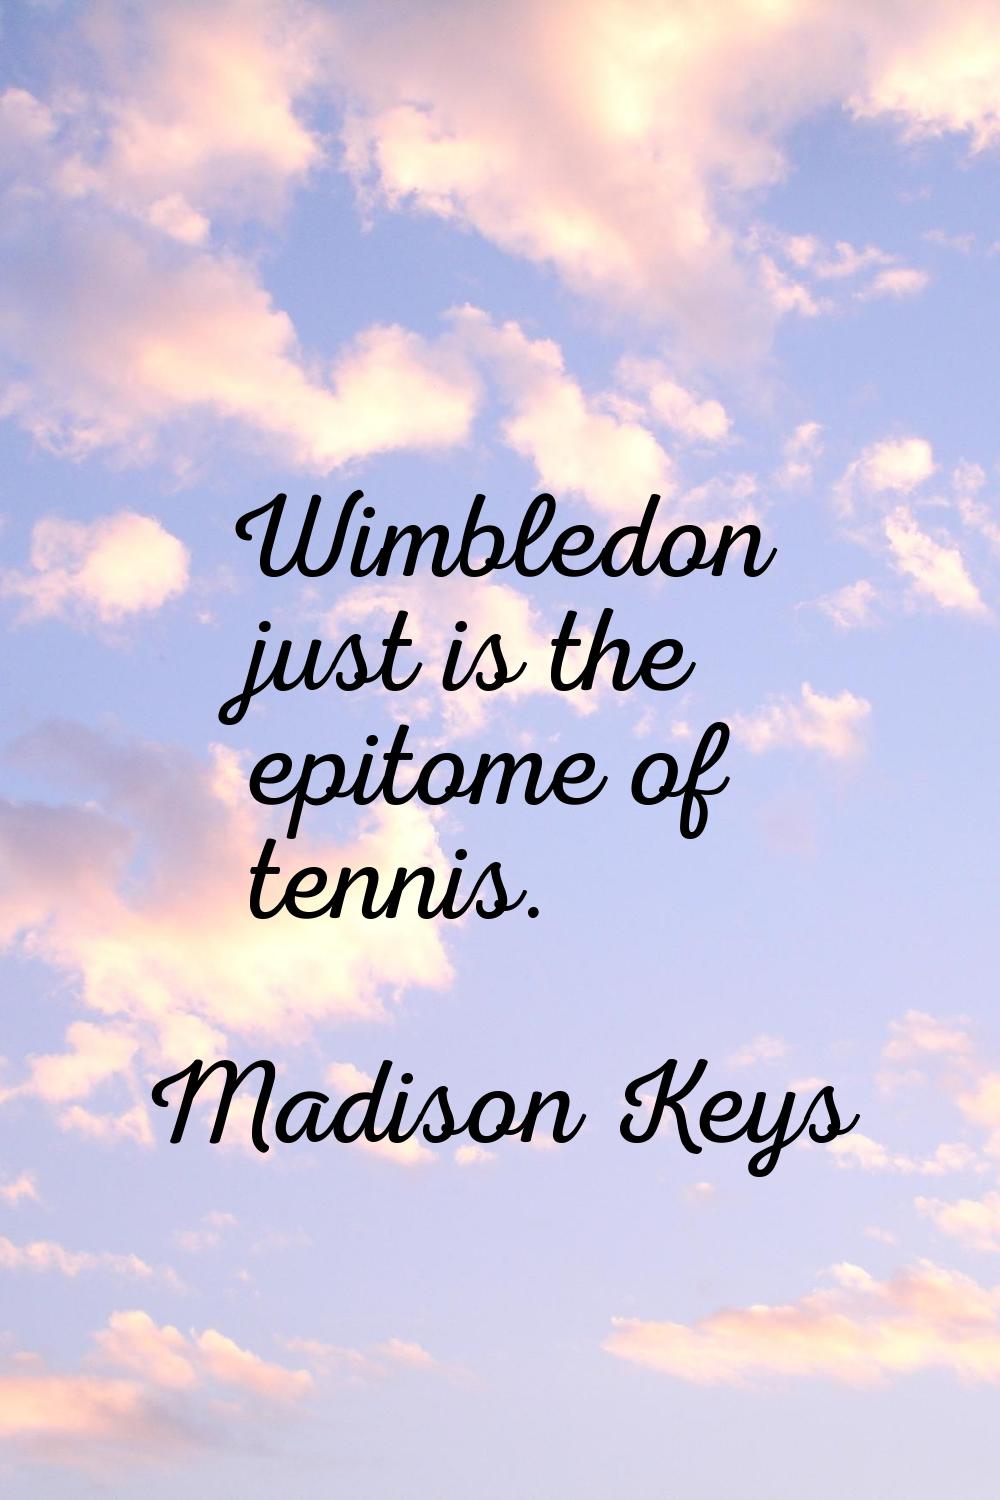 Wimbledon just is the epitome of tennis.